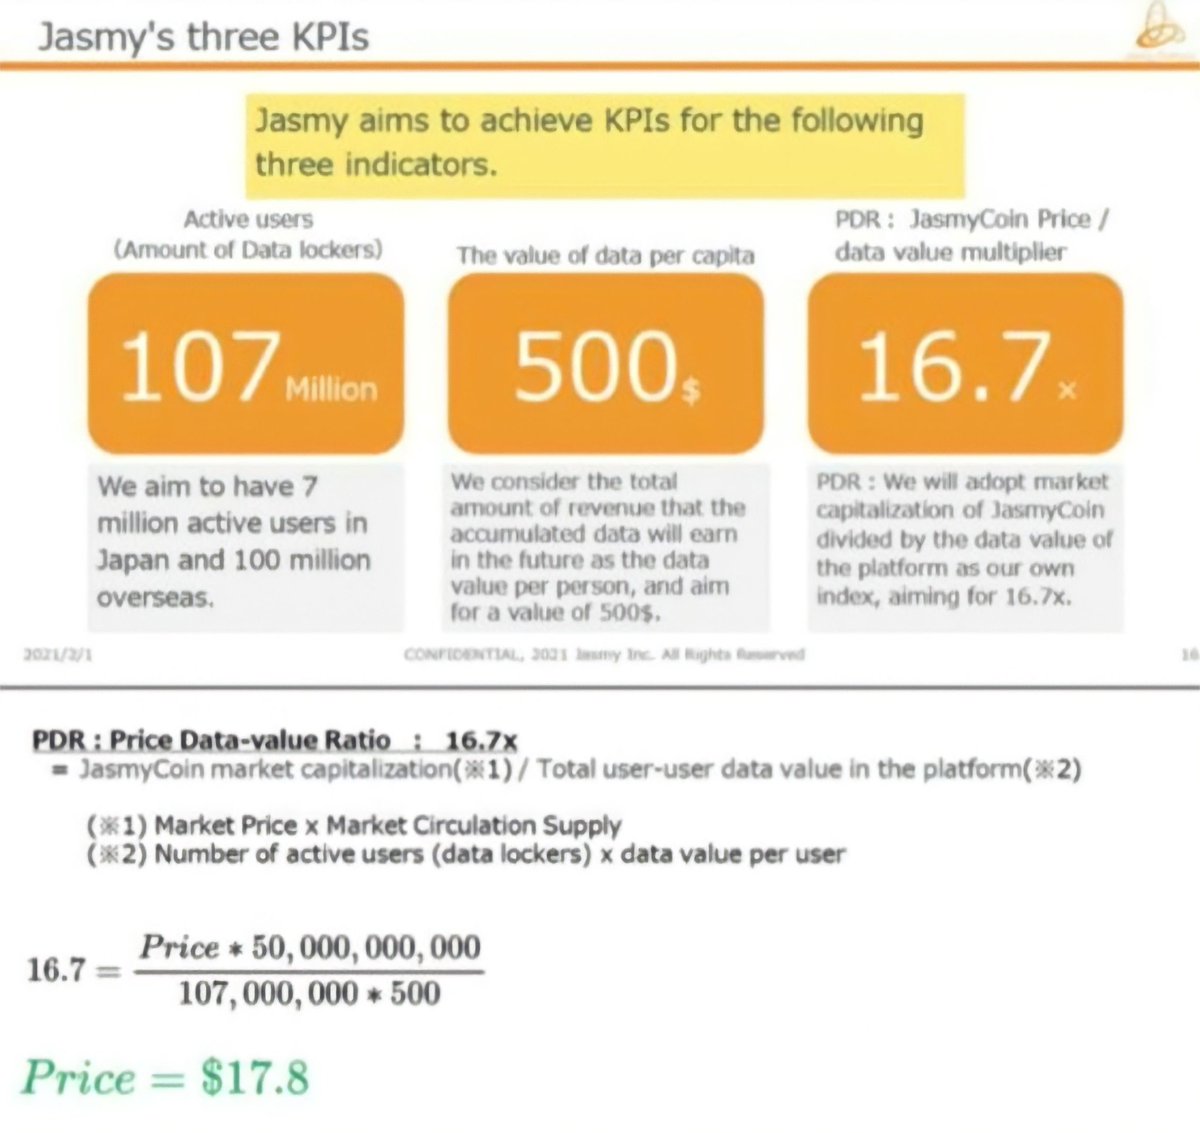 Want To Get Rich? Buy $Jasmy !!! If You Do ... You Will Be RICH !!! Just Need some patience, When KPI reached $JASMY should be around USD $17, see pict for detail.